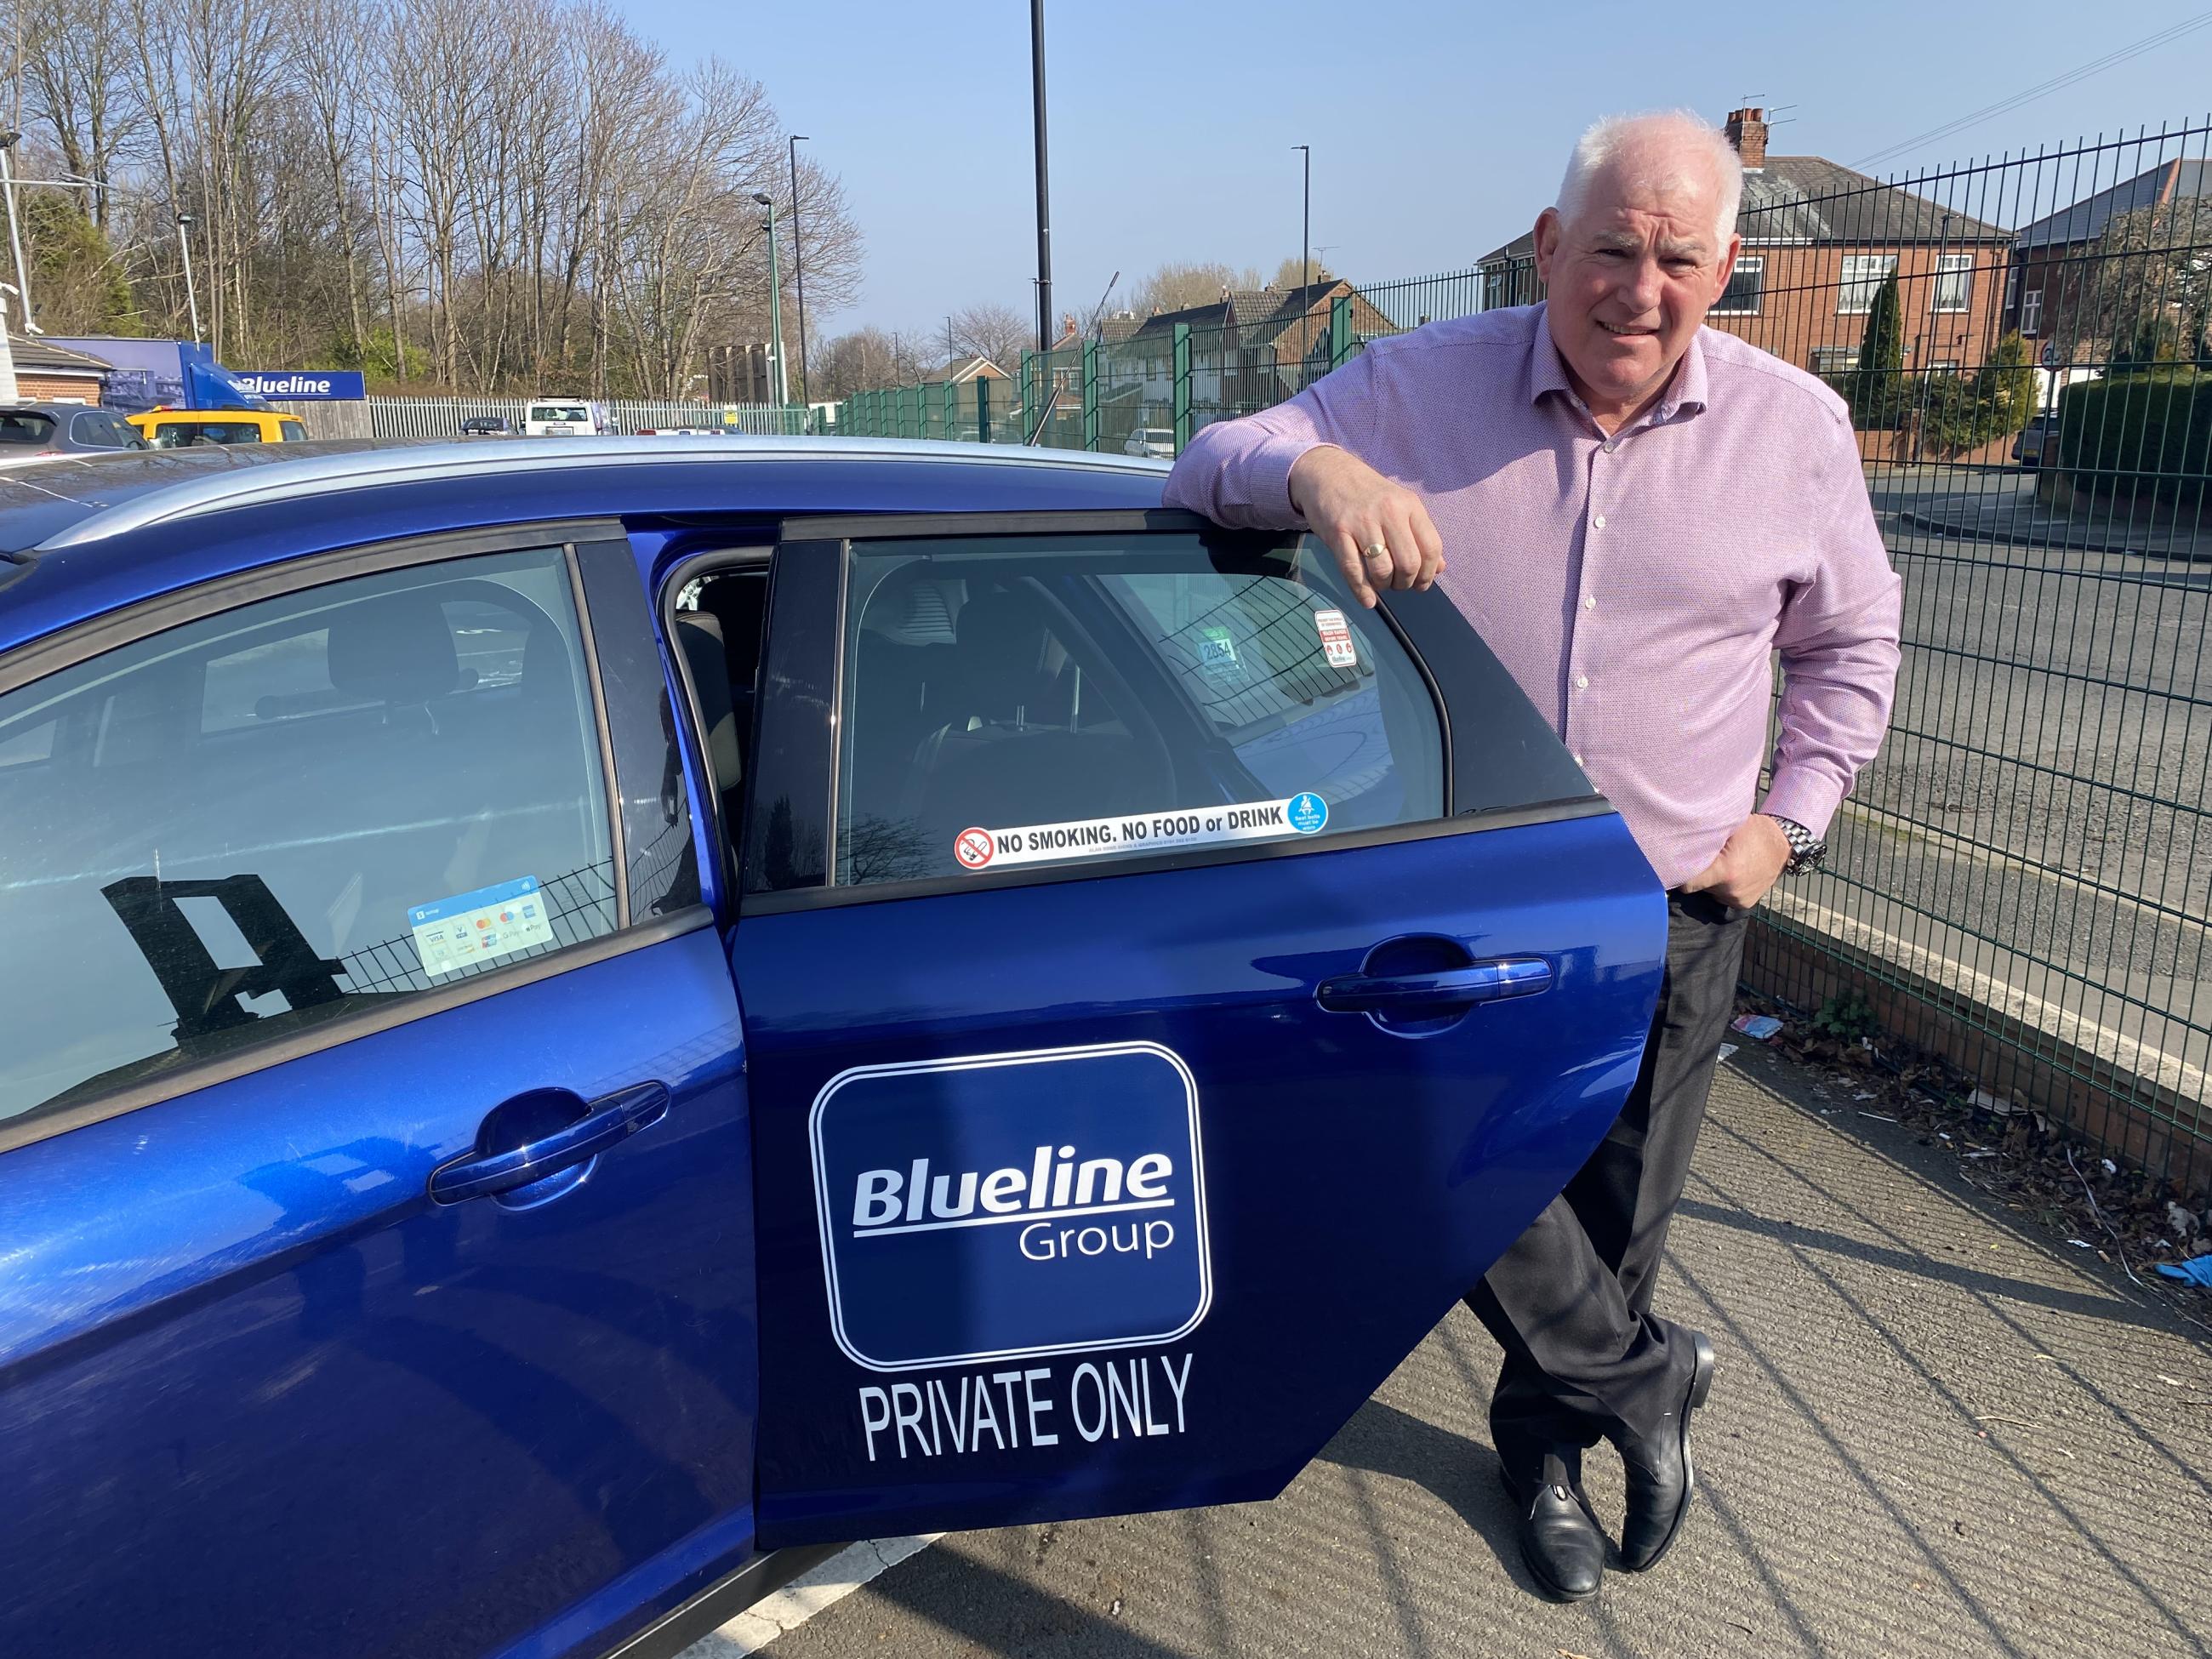 Ian Shanks, owner and managing director of Blueline Taxis